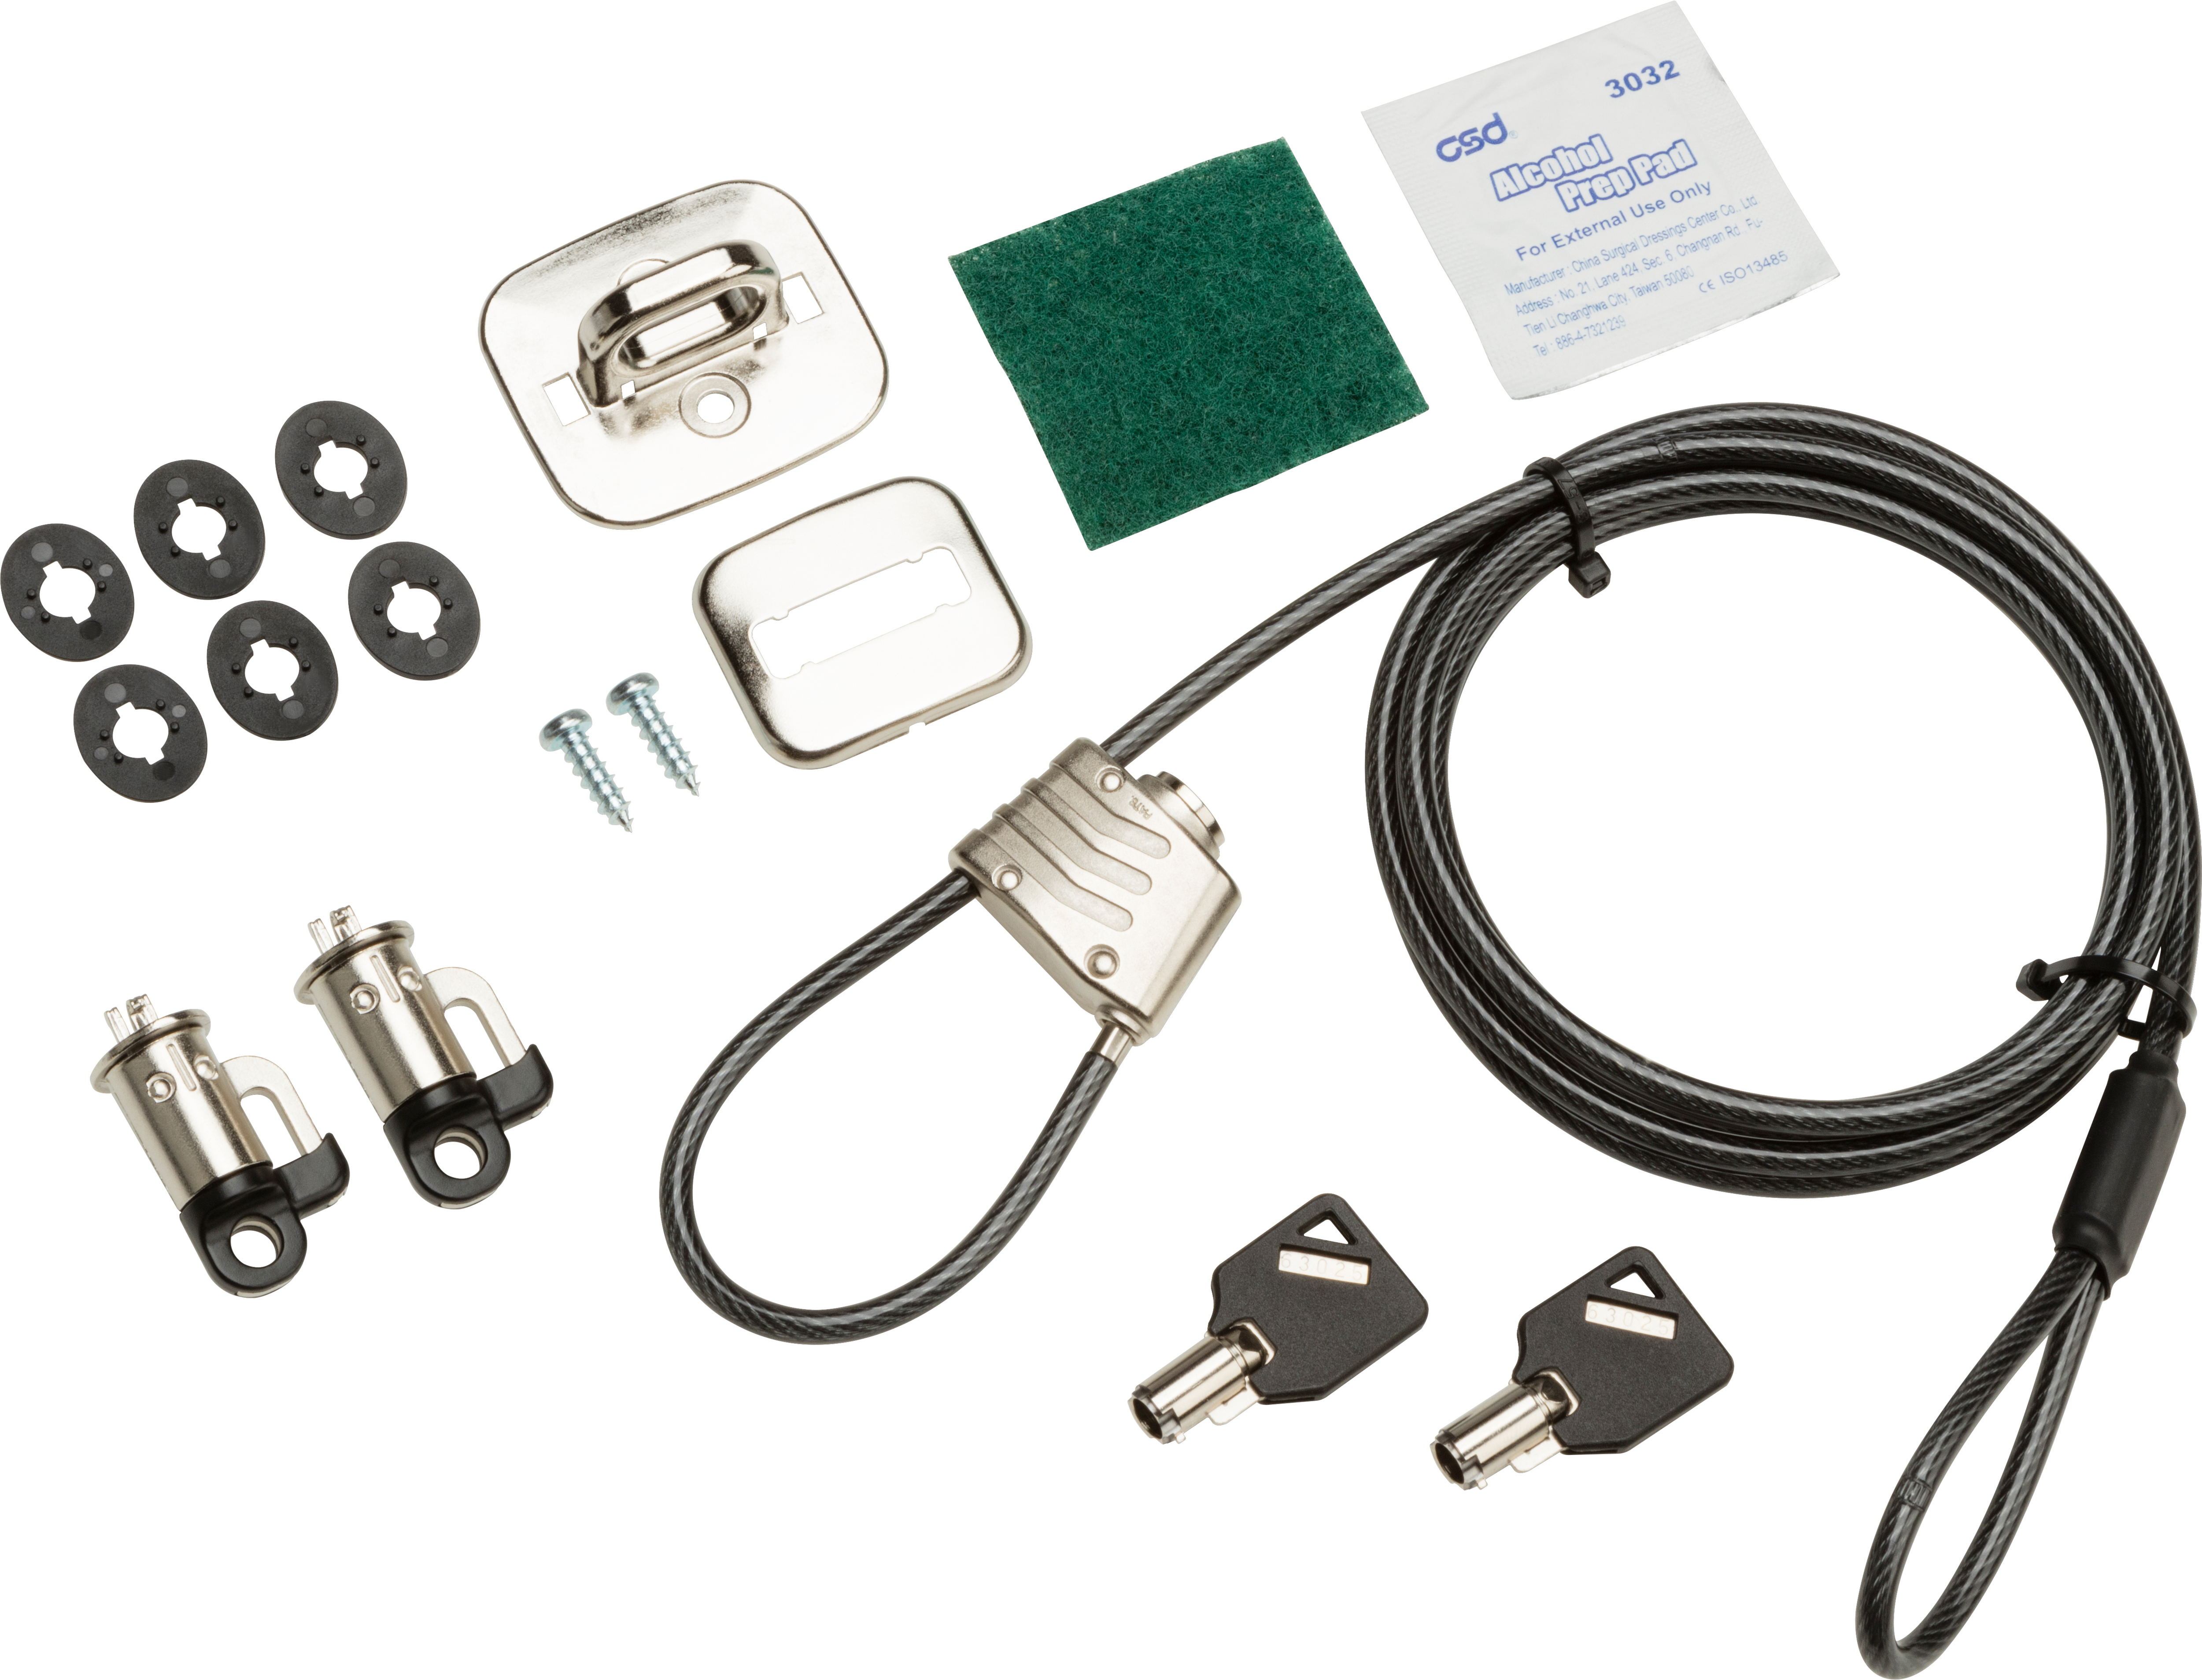 HP Business PC Security Lock v3 Kit - Sicherheitskit - für HP 280 G3, 280 G4, 285 G3, 290 G1, 290 G2, 290 G3; Desktop Pro A 300 G3, Pro A G2; EliteDesk 705 G4 (micro tower, SFF)